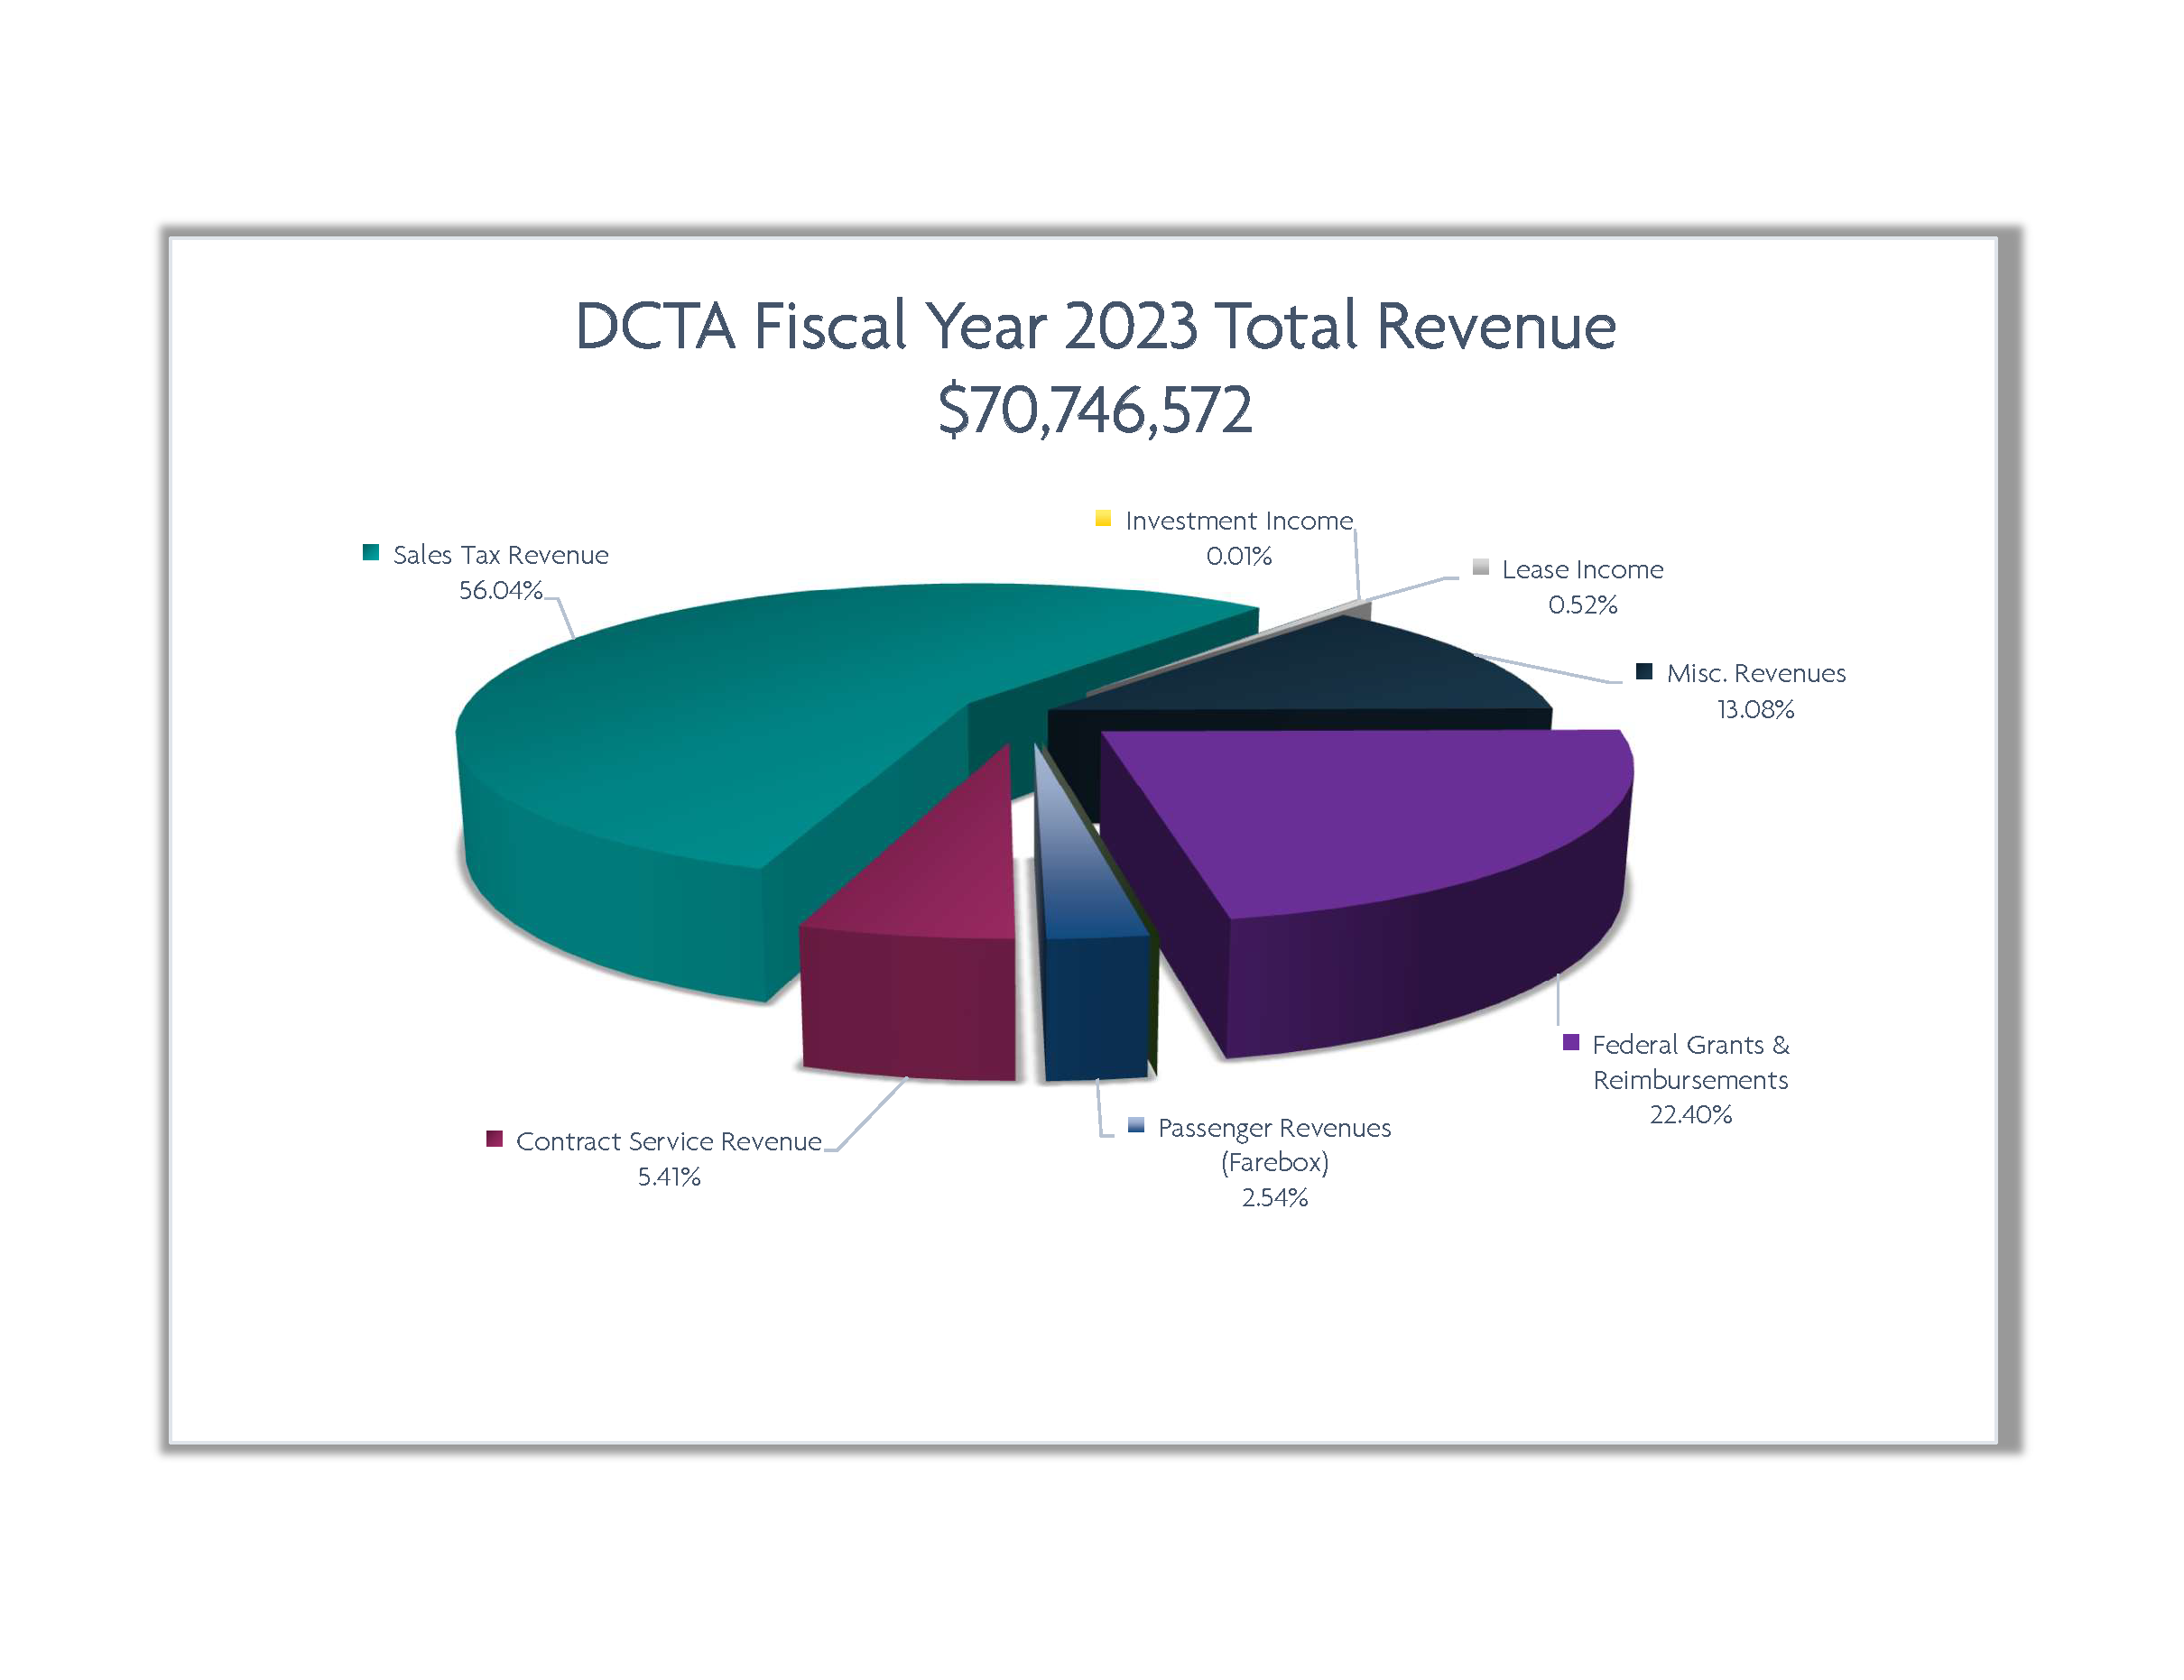 DCTA Fiscal Year 2023 Total Revenues Pie Graph